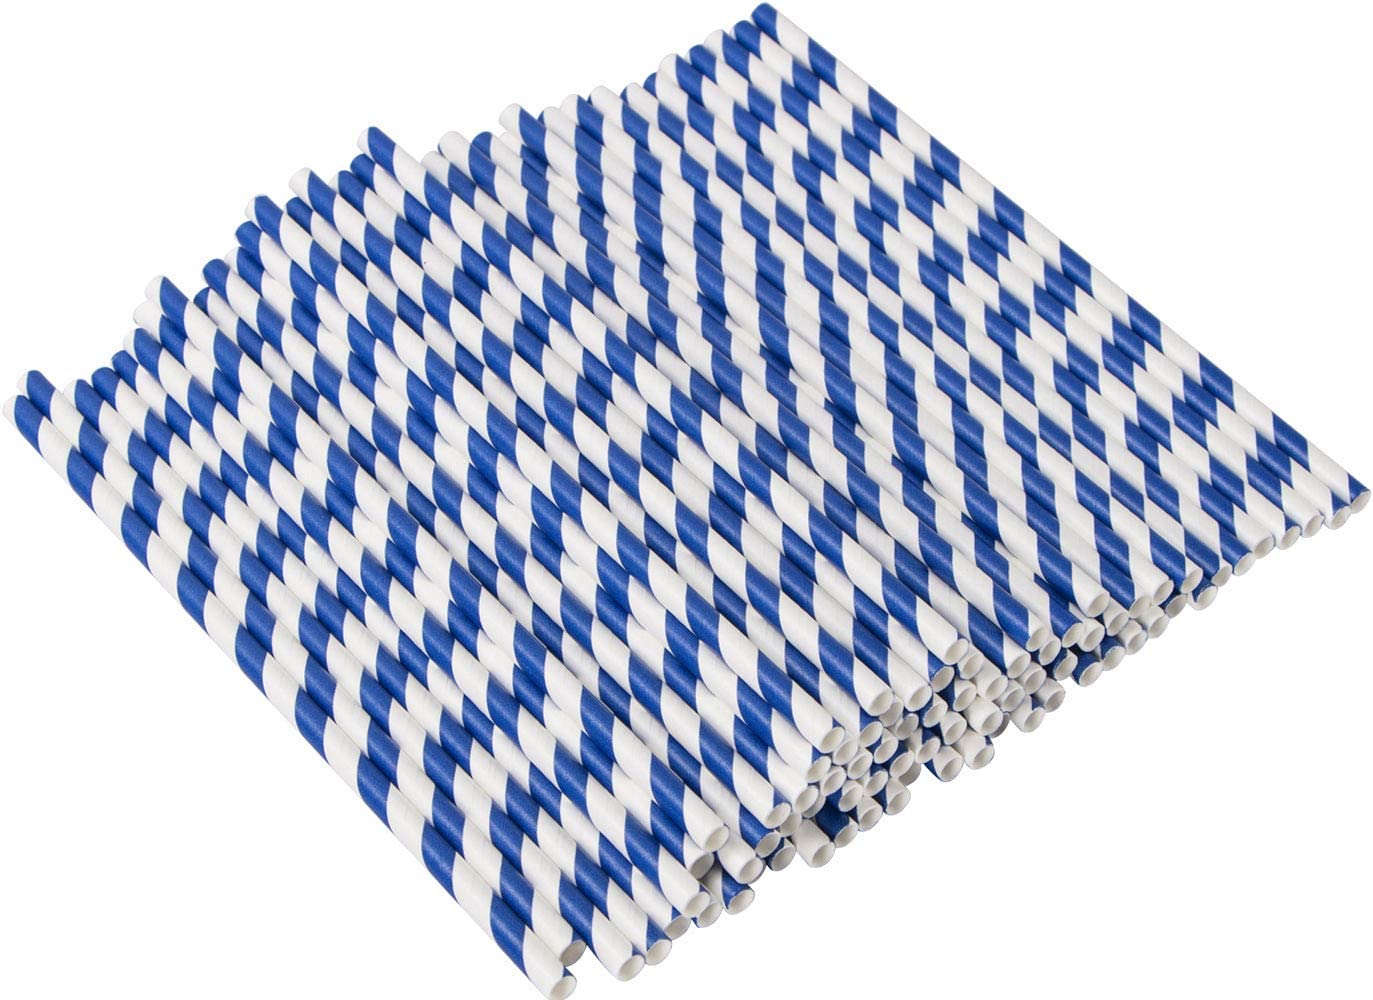 Webake 7.75x0.25 Inch Biodegradable Blue Striped Disposable Flavored Milk Straws (144 Pack)